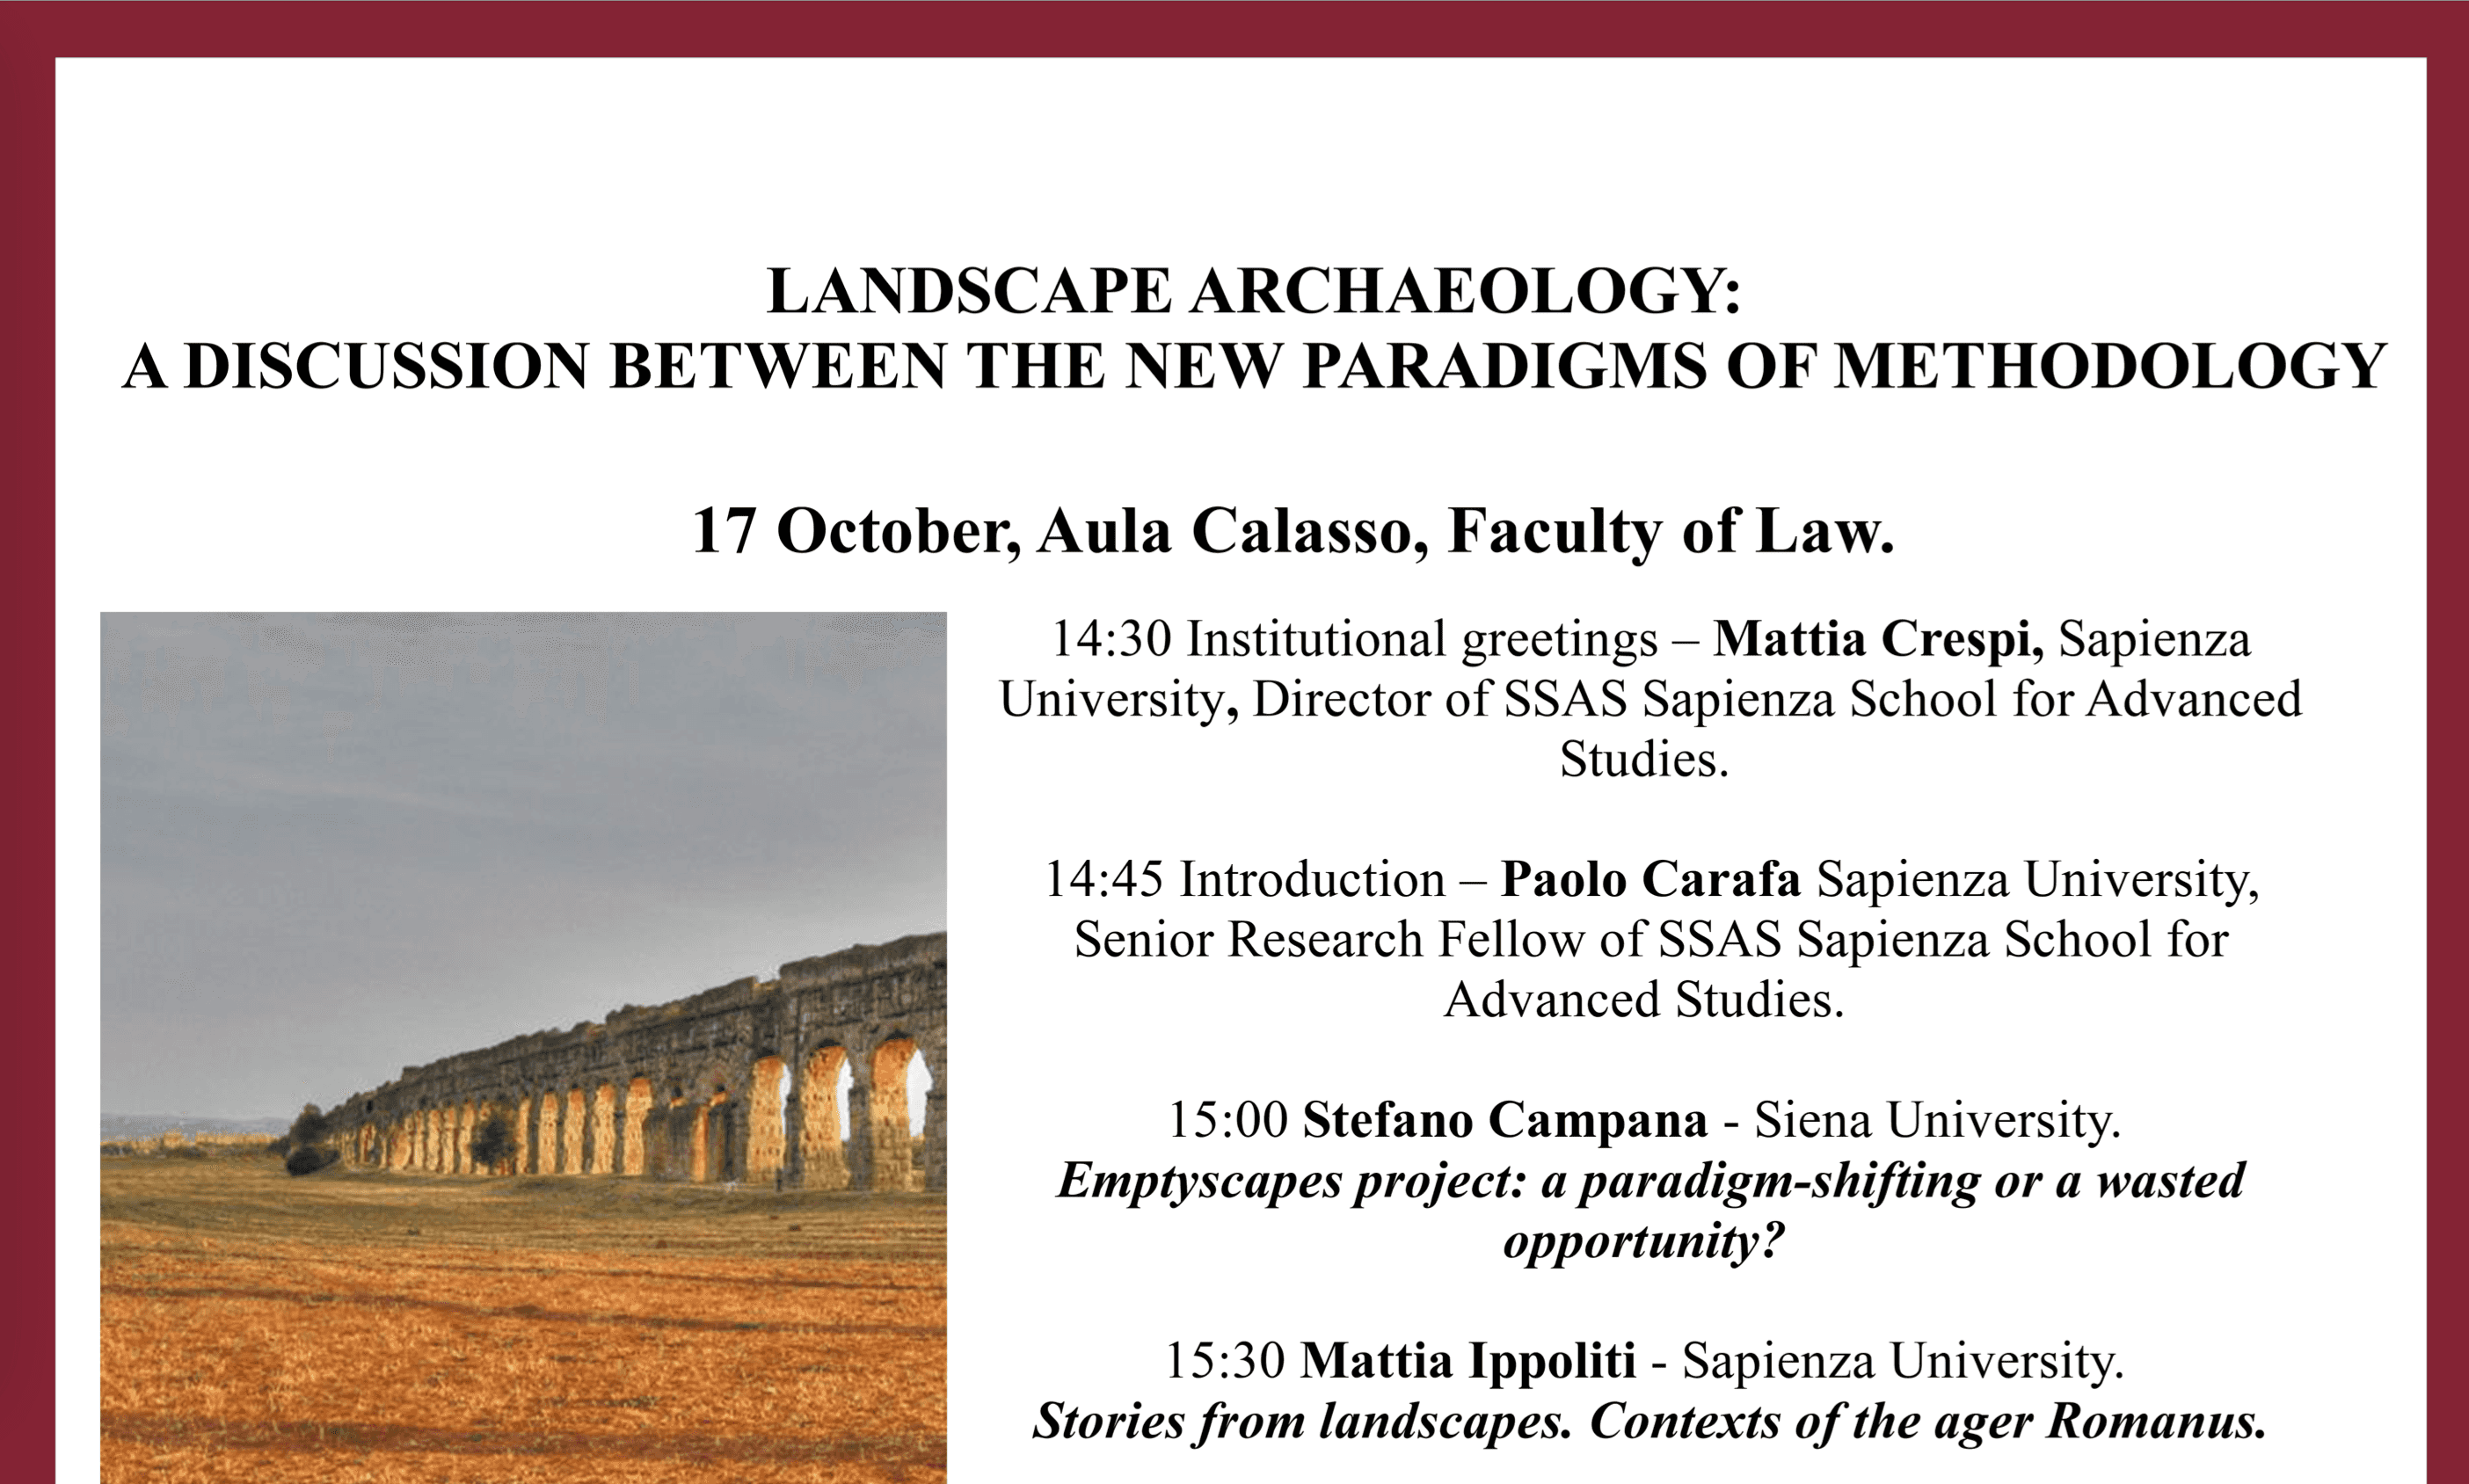 Landscape Archaeology: a discussion between the new paradigms of methodology